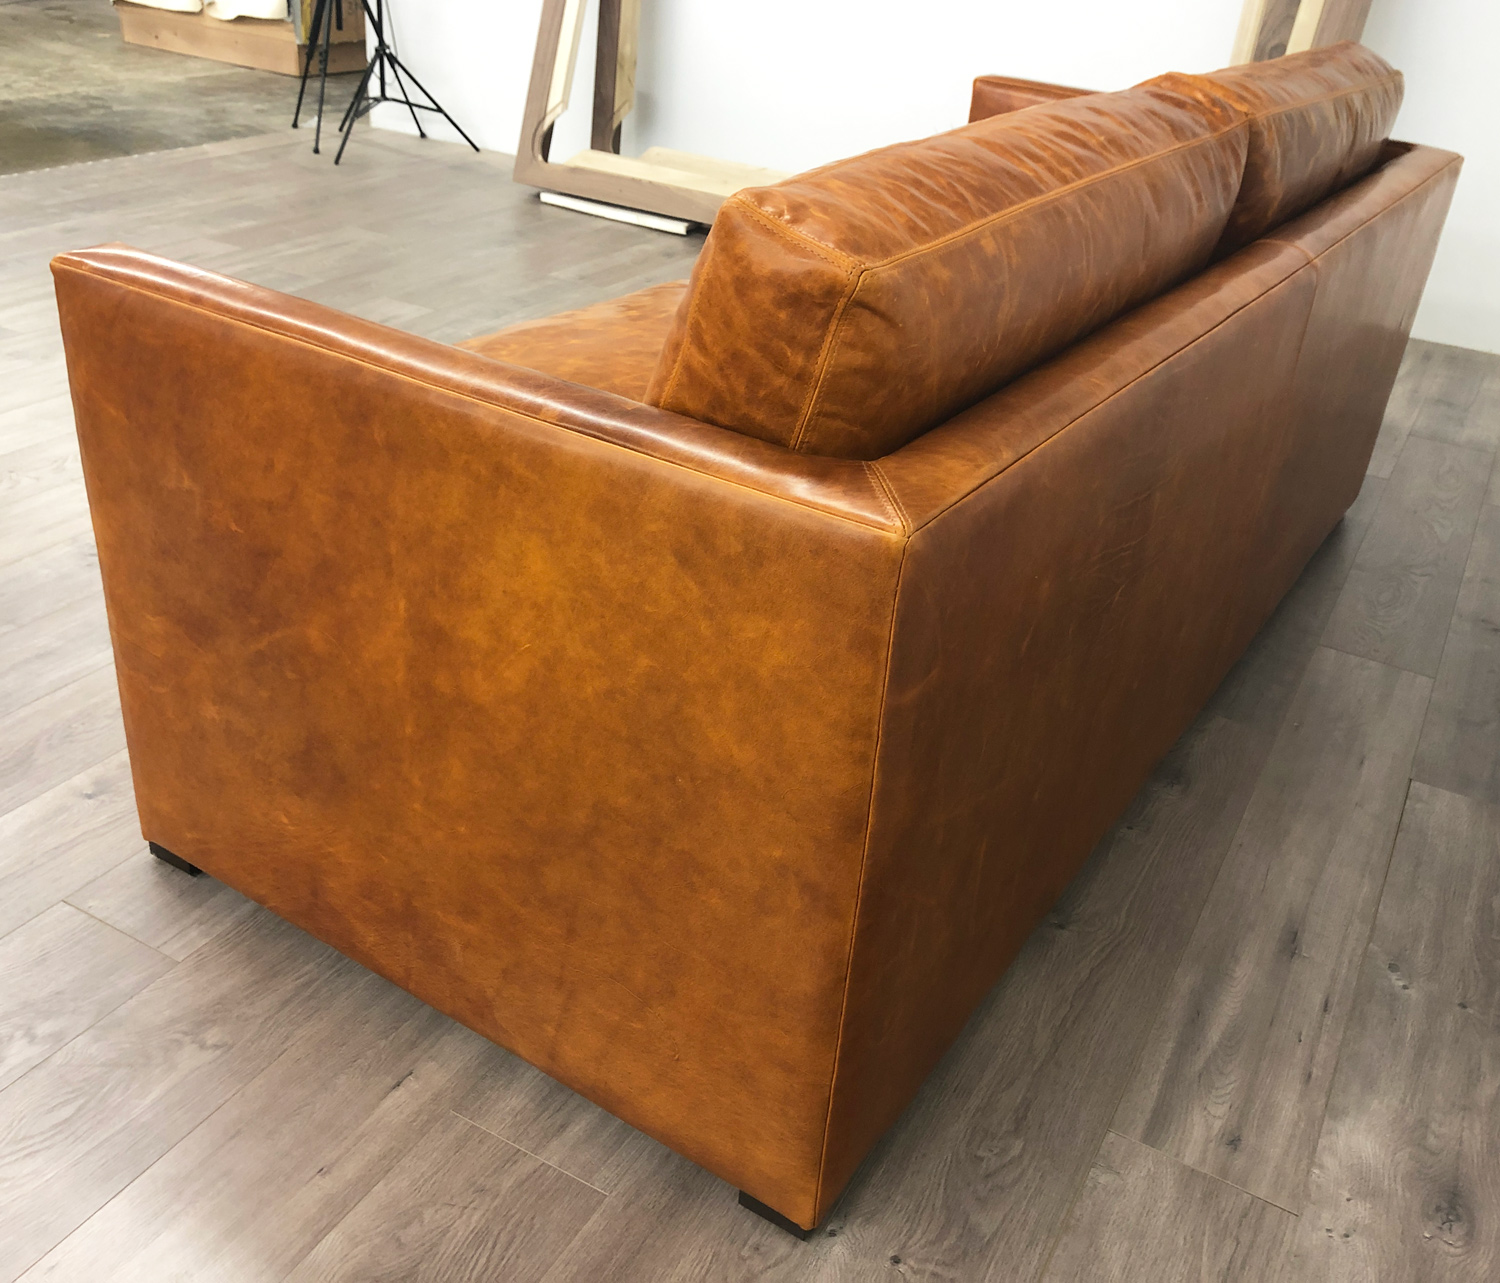 Oscar Leather Sofa in Domaine Bronze Leather - rear angle view